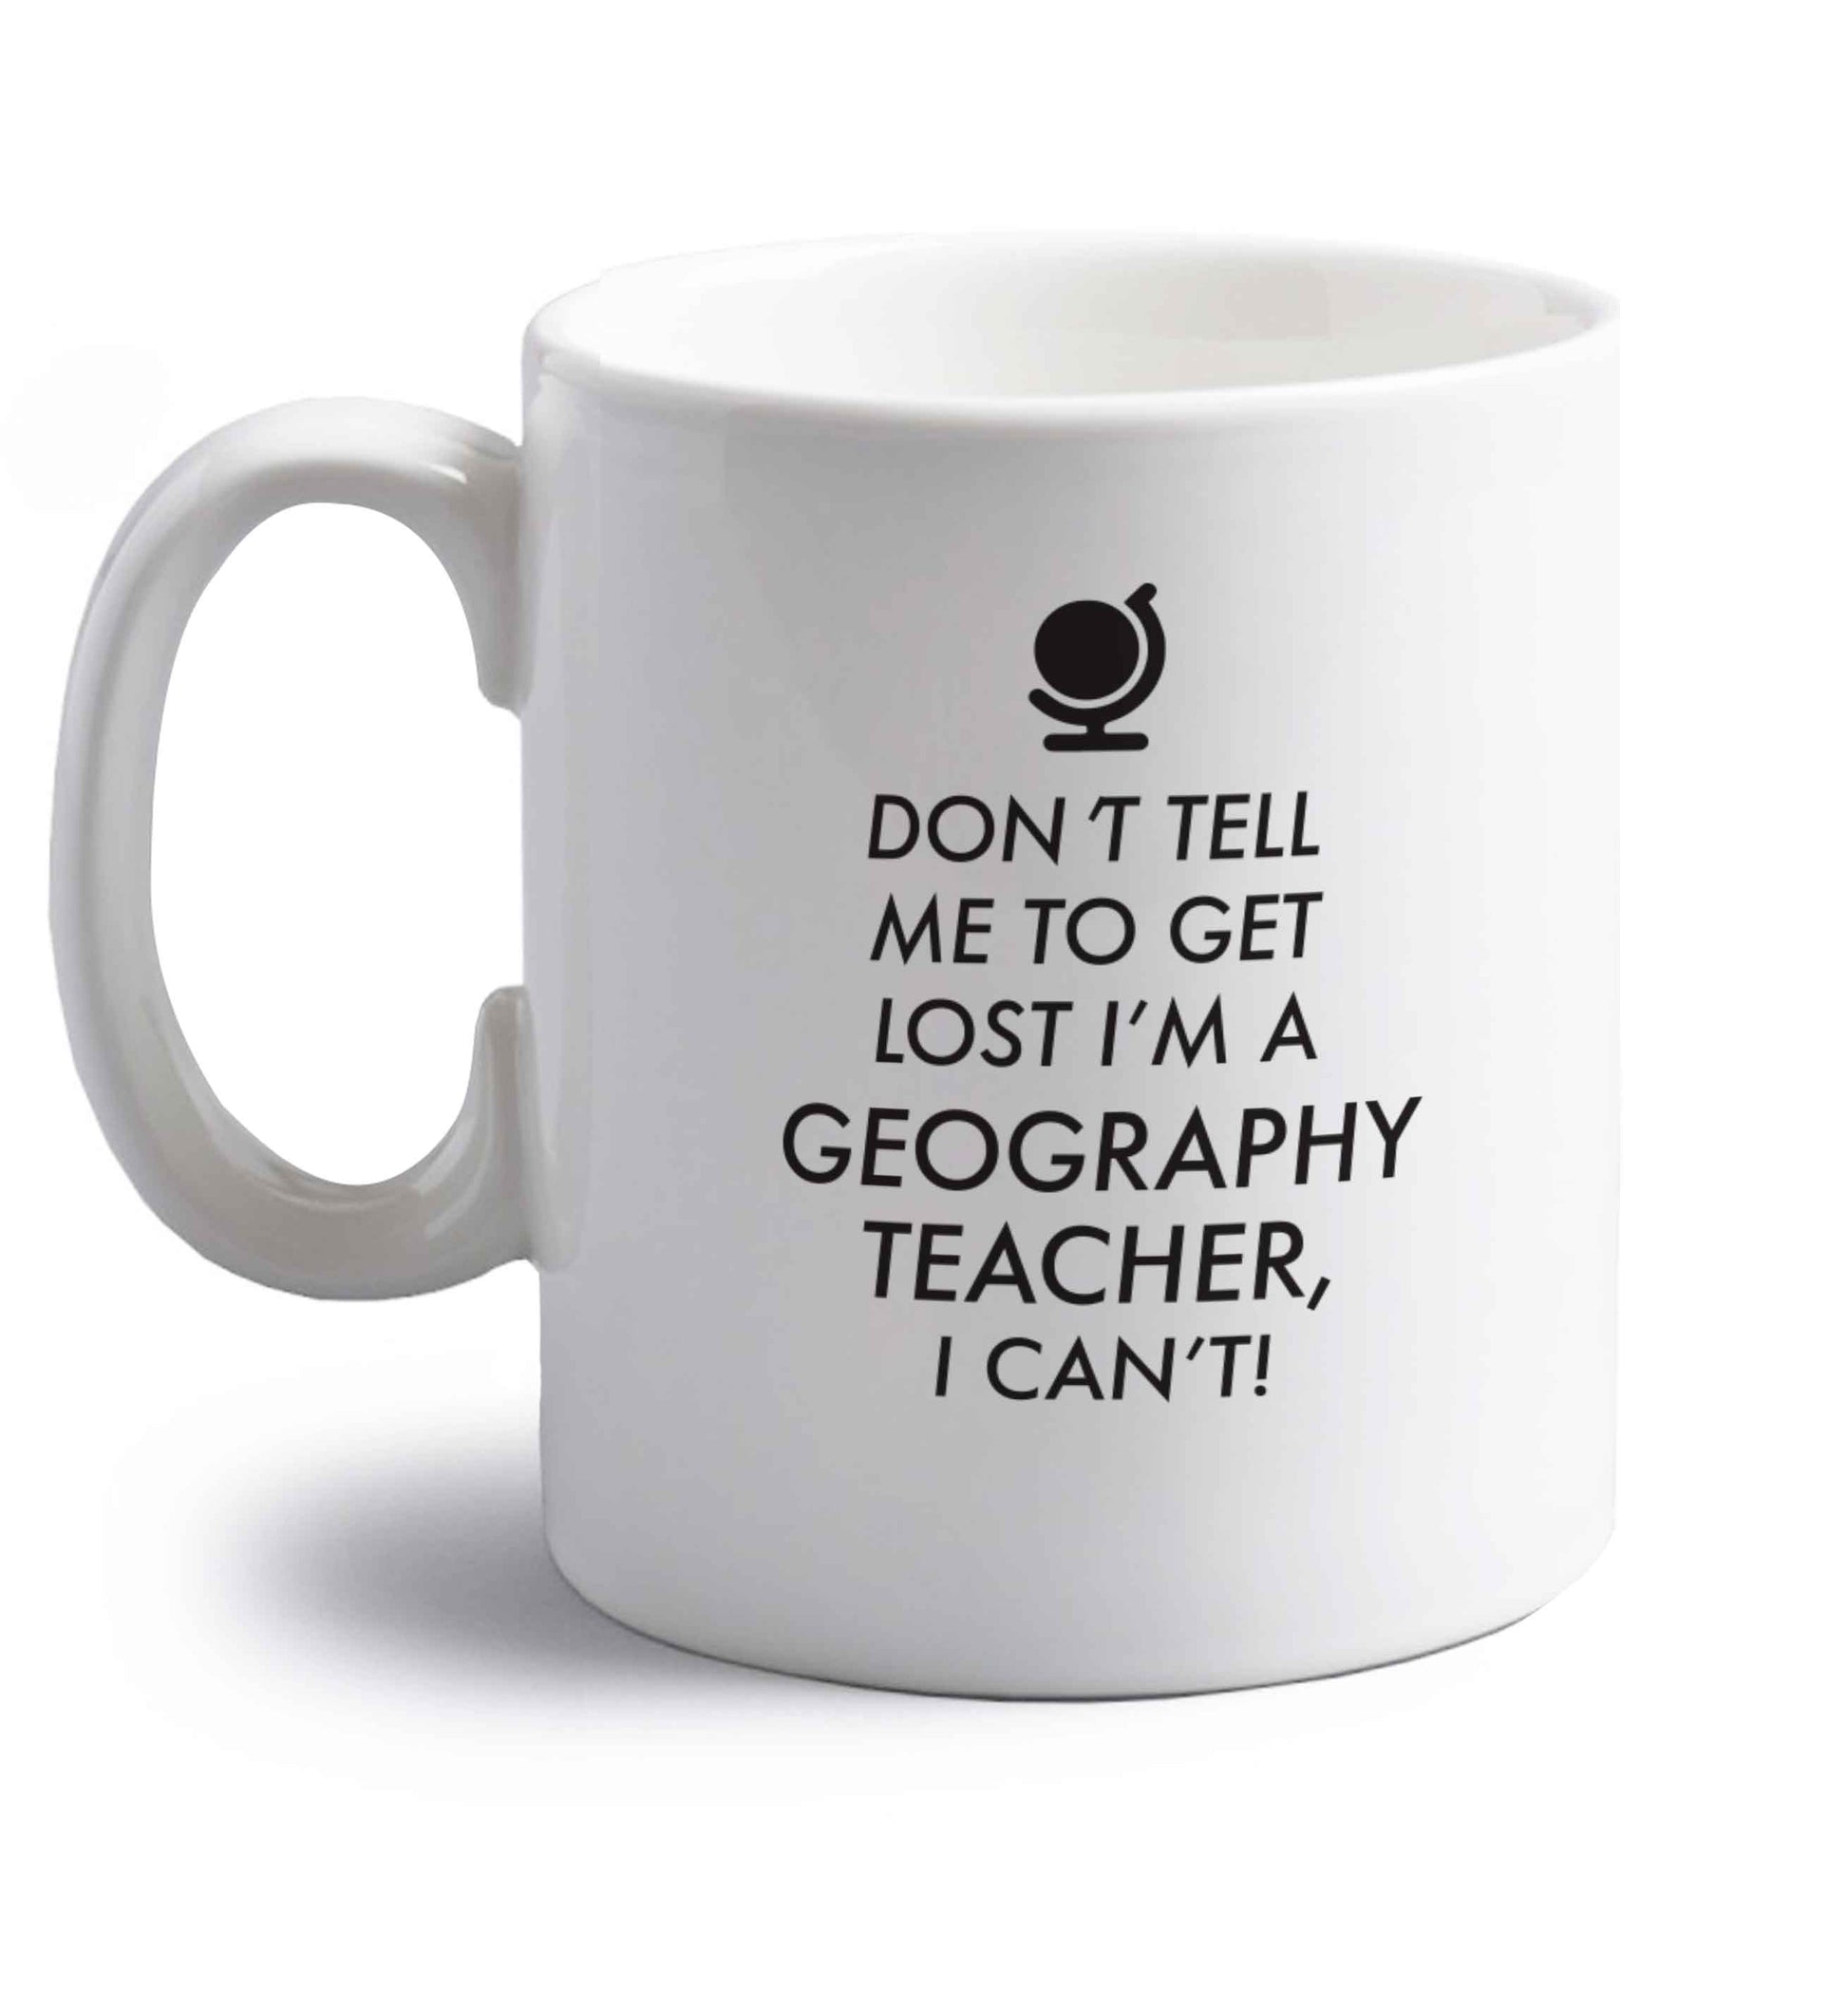 Don't tell me to get lost I'm a geography teacher, I can't right handed white ceramic mug 